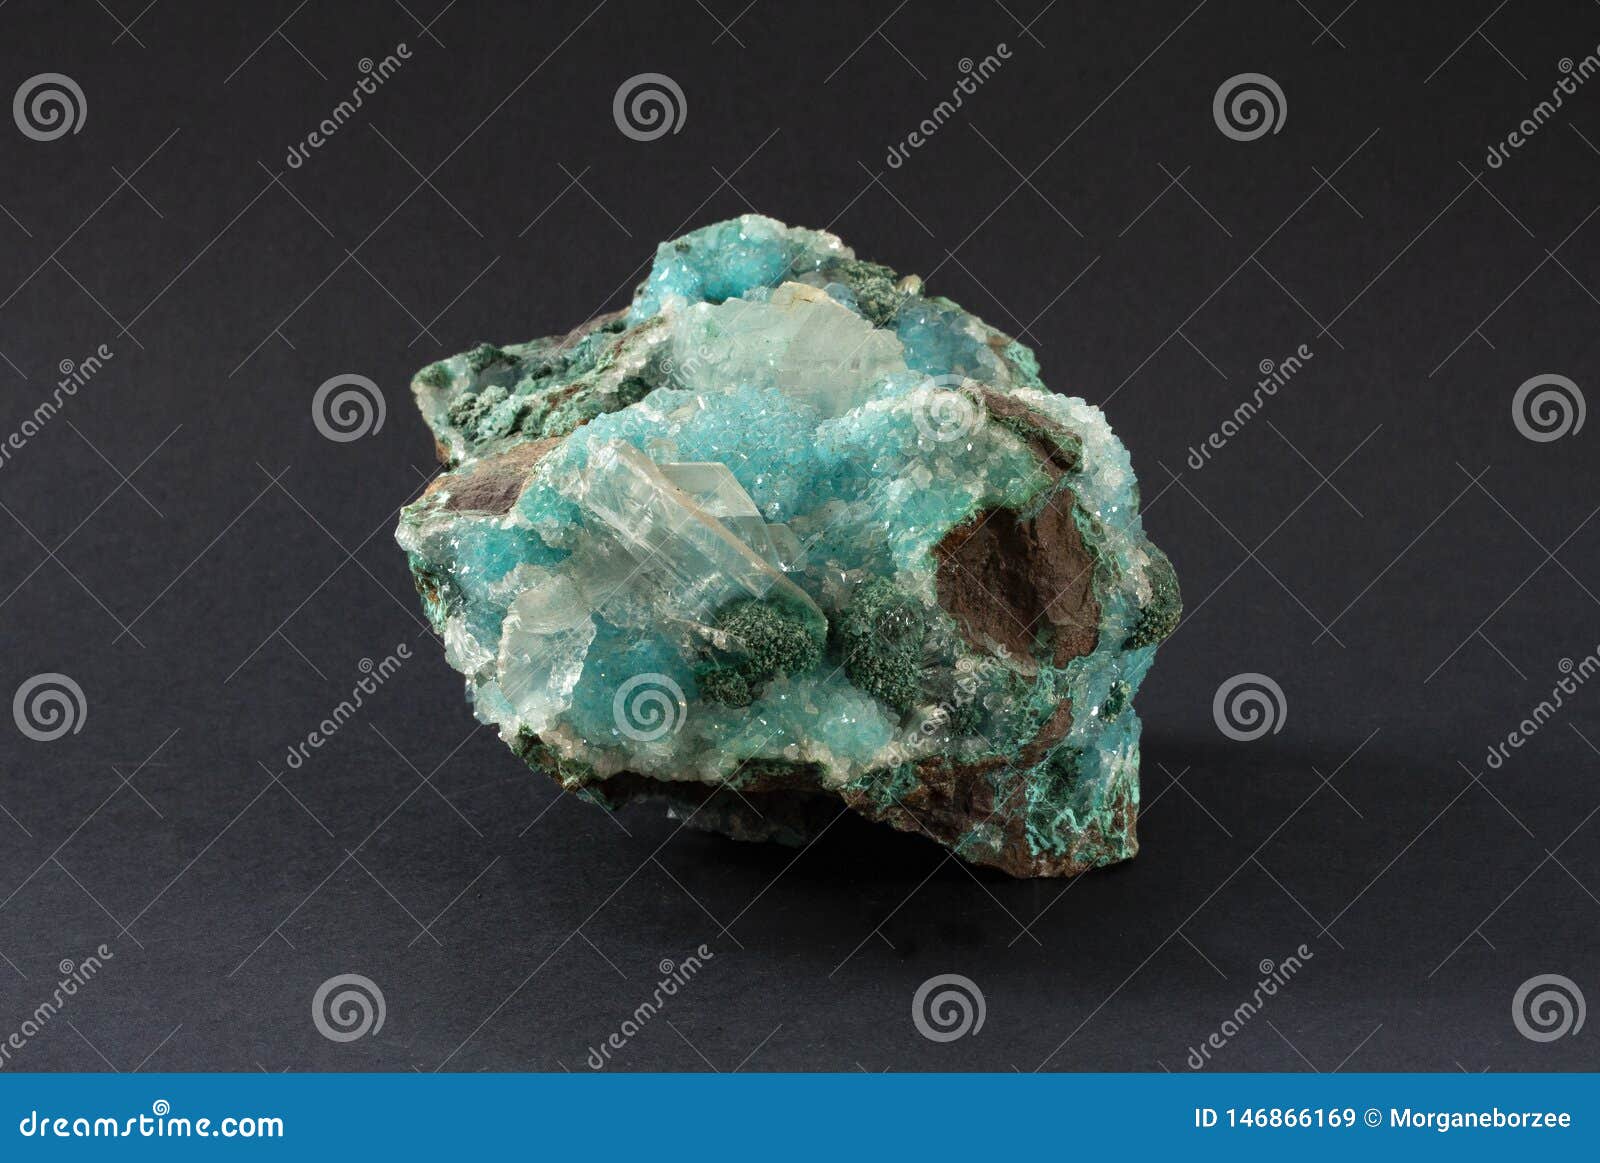 piece of chrysocolla mineral with quartz and gypsum, blue turquoise crystals.